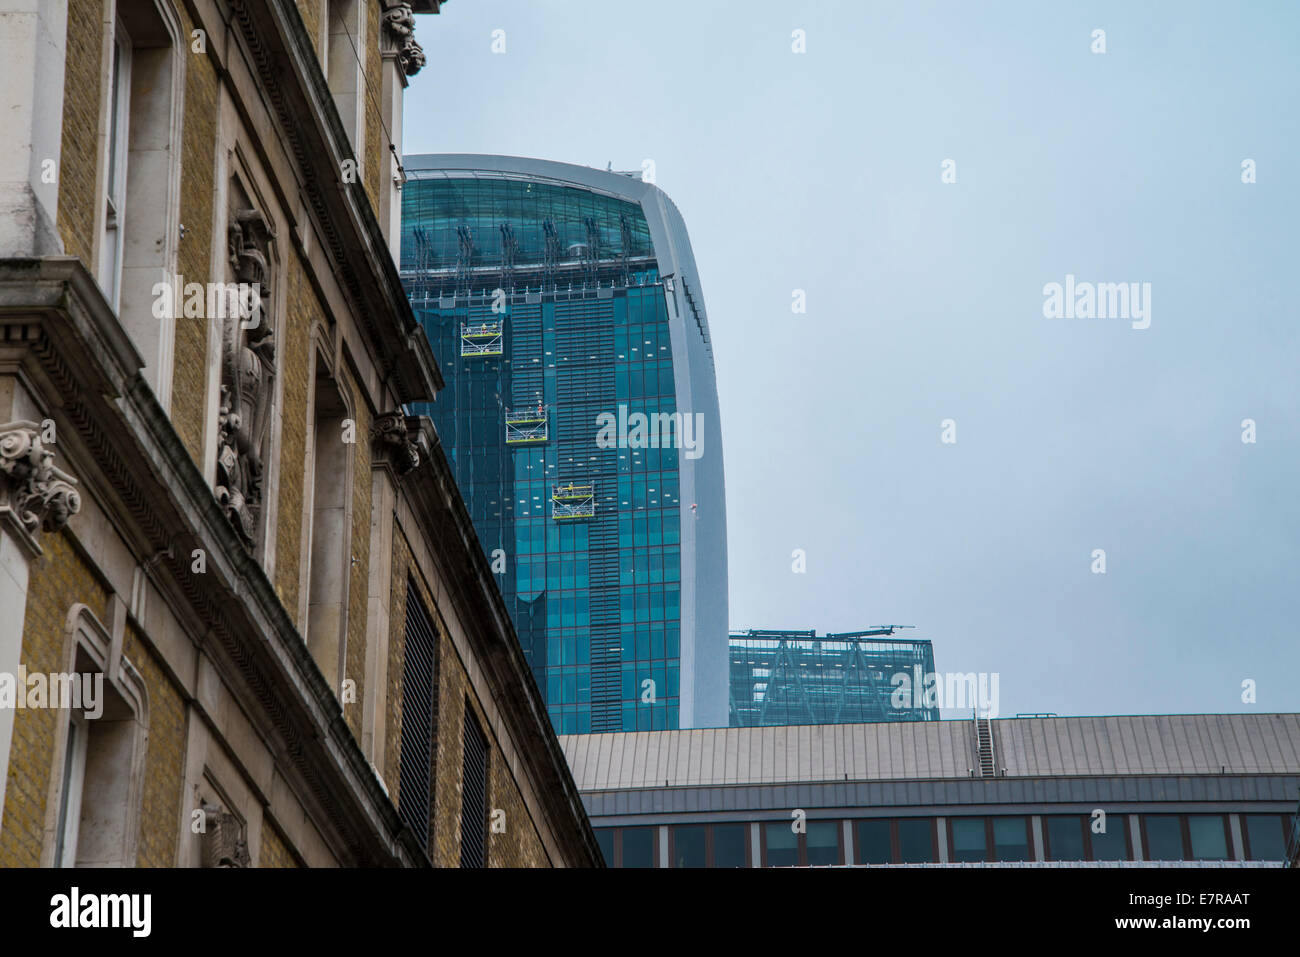 Autumn 2014: Walkie talkie building with three window cleaning cradles at Fenchurch Street, London, England. Stock Photo